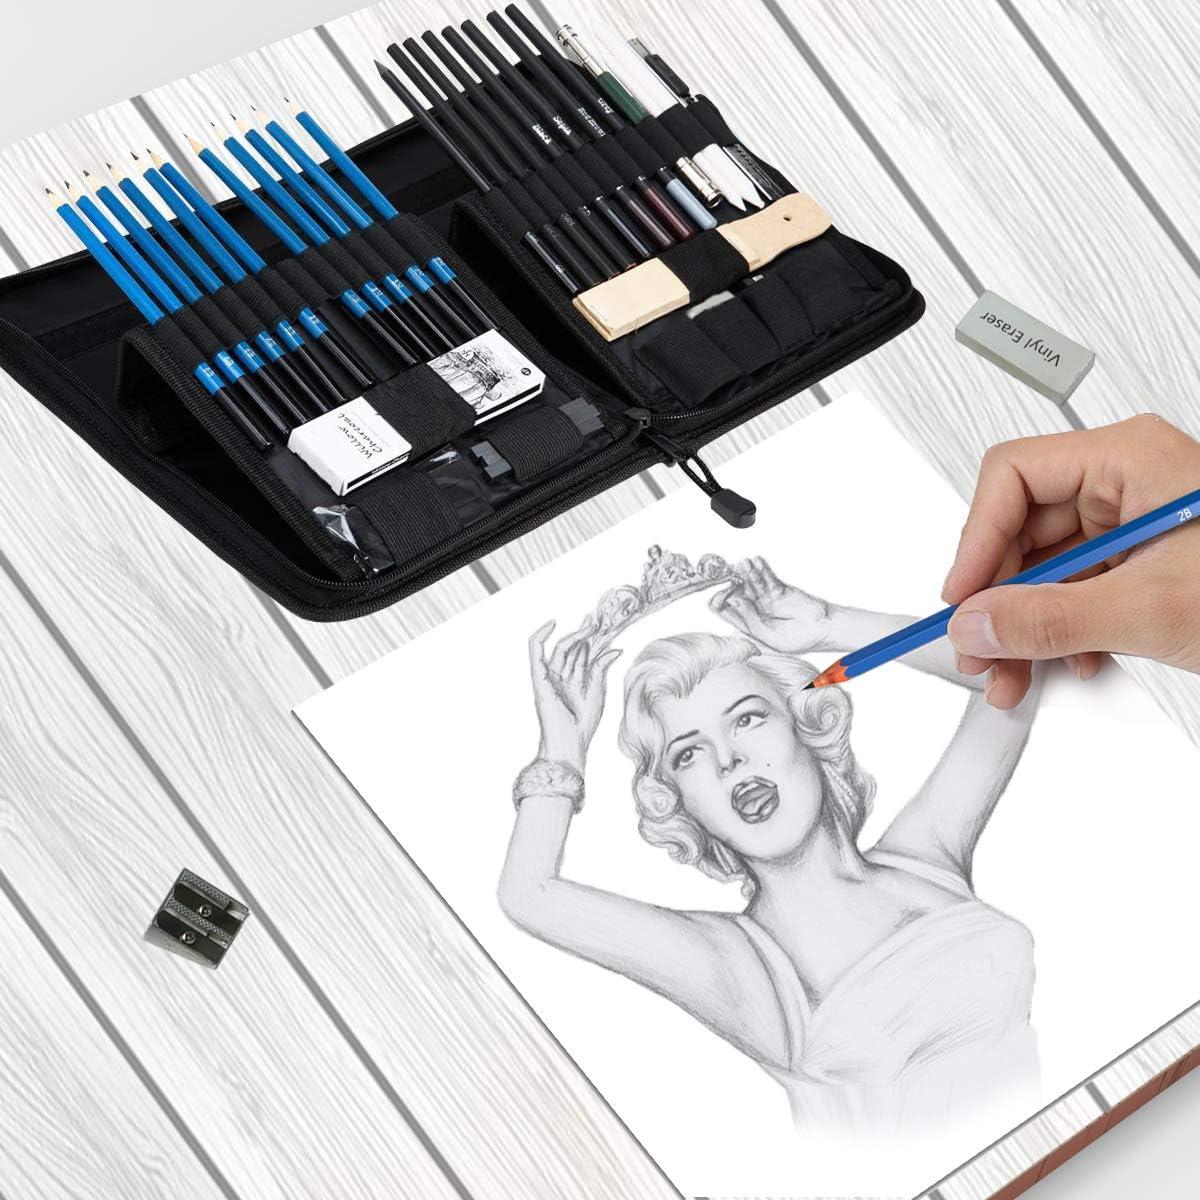 Professional Drawing and Sketch Kit - Professional Art Kit and